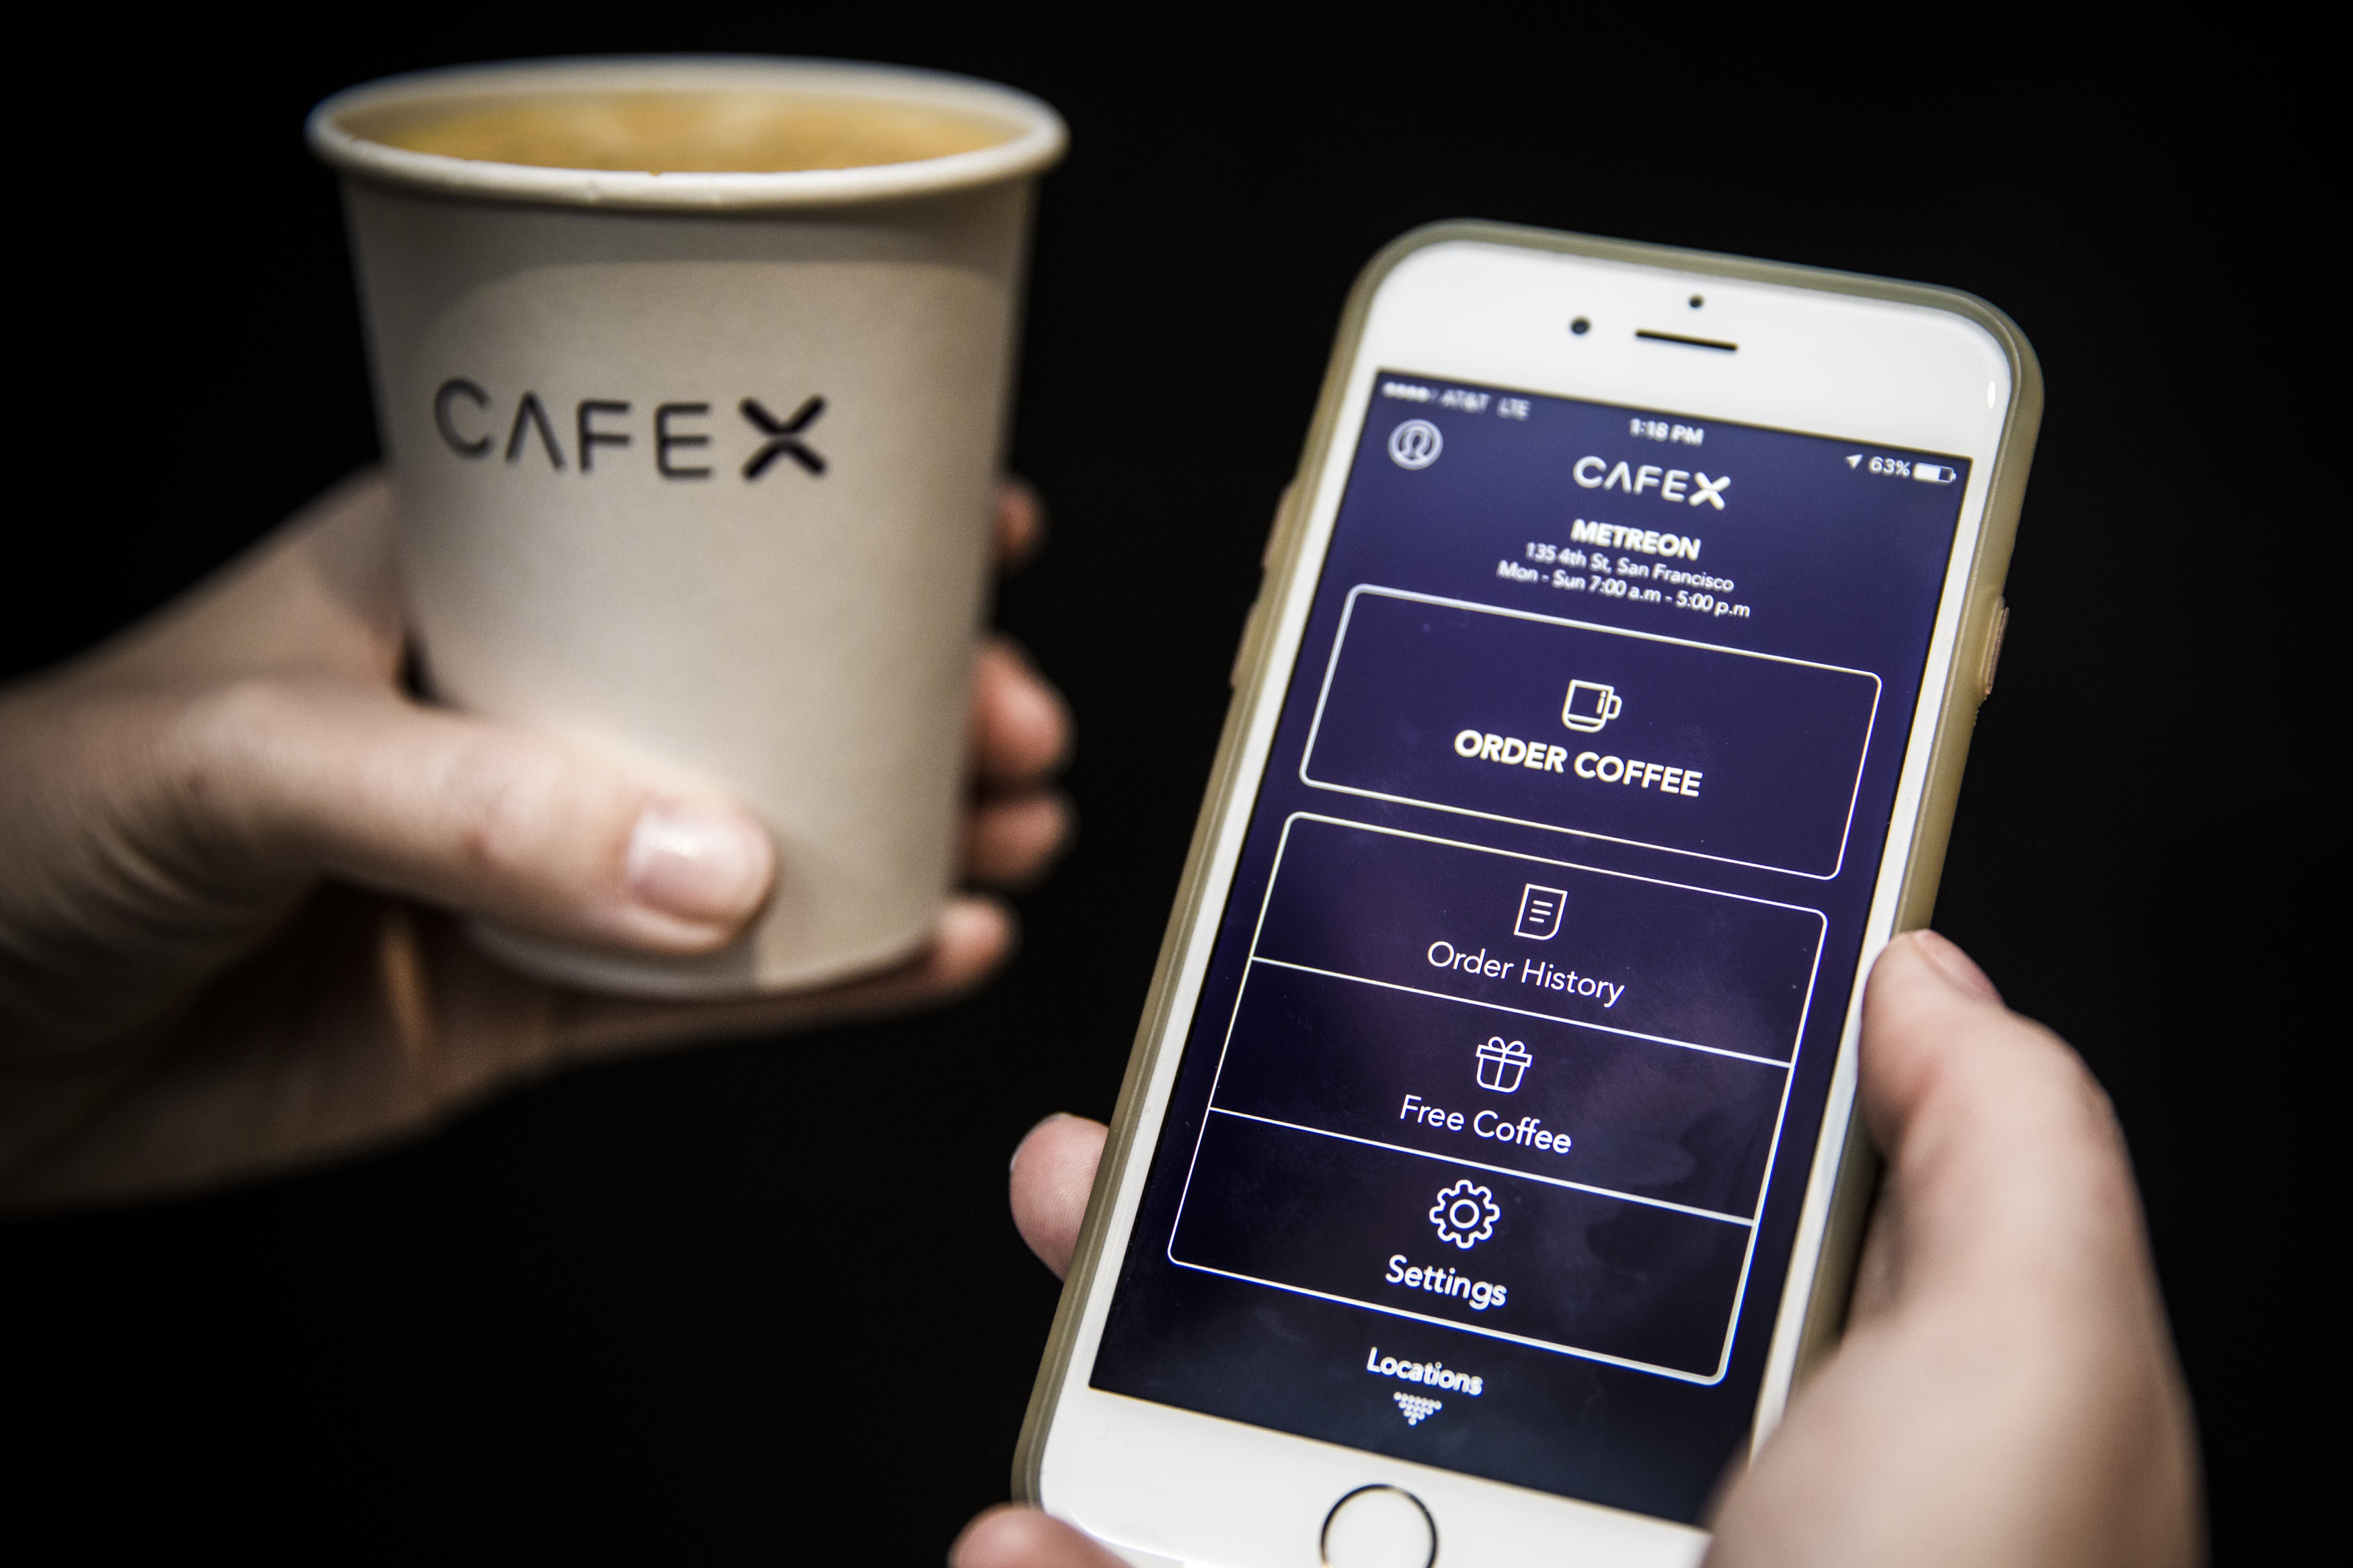 You order Cafe X ​coffee with an app or a tablet at the cafe.